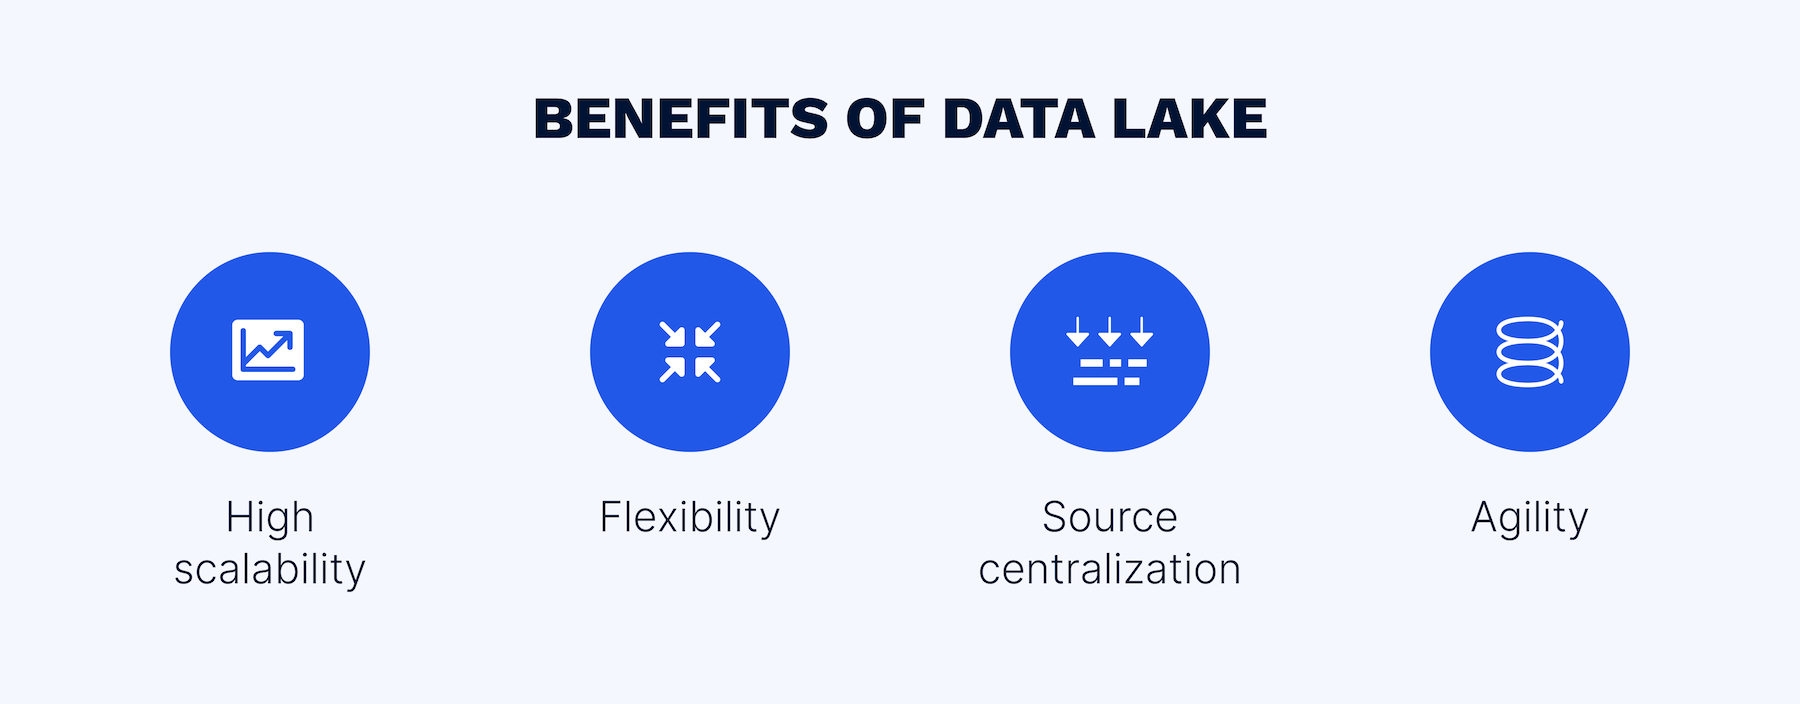 Top benefits of a data lake for business